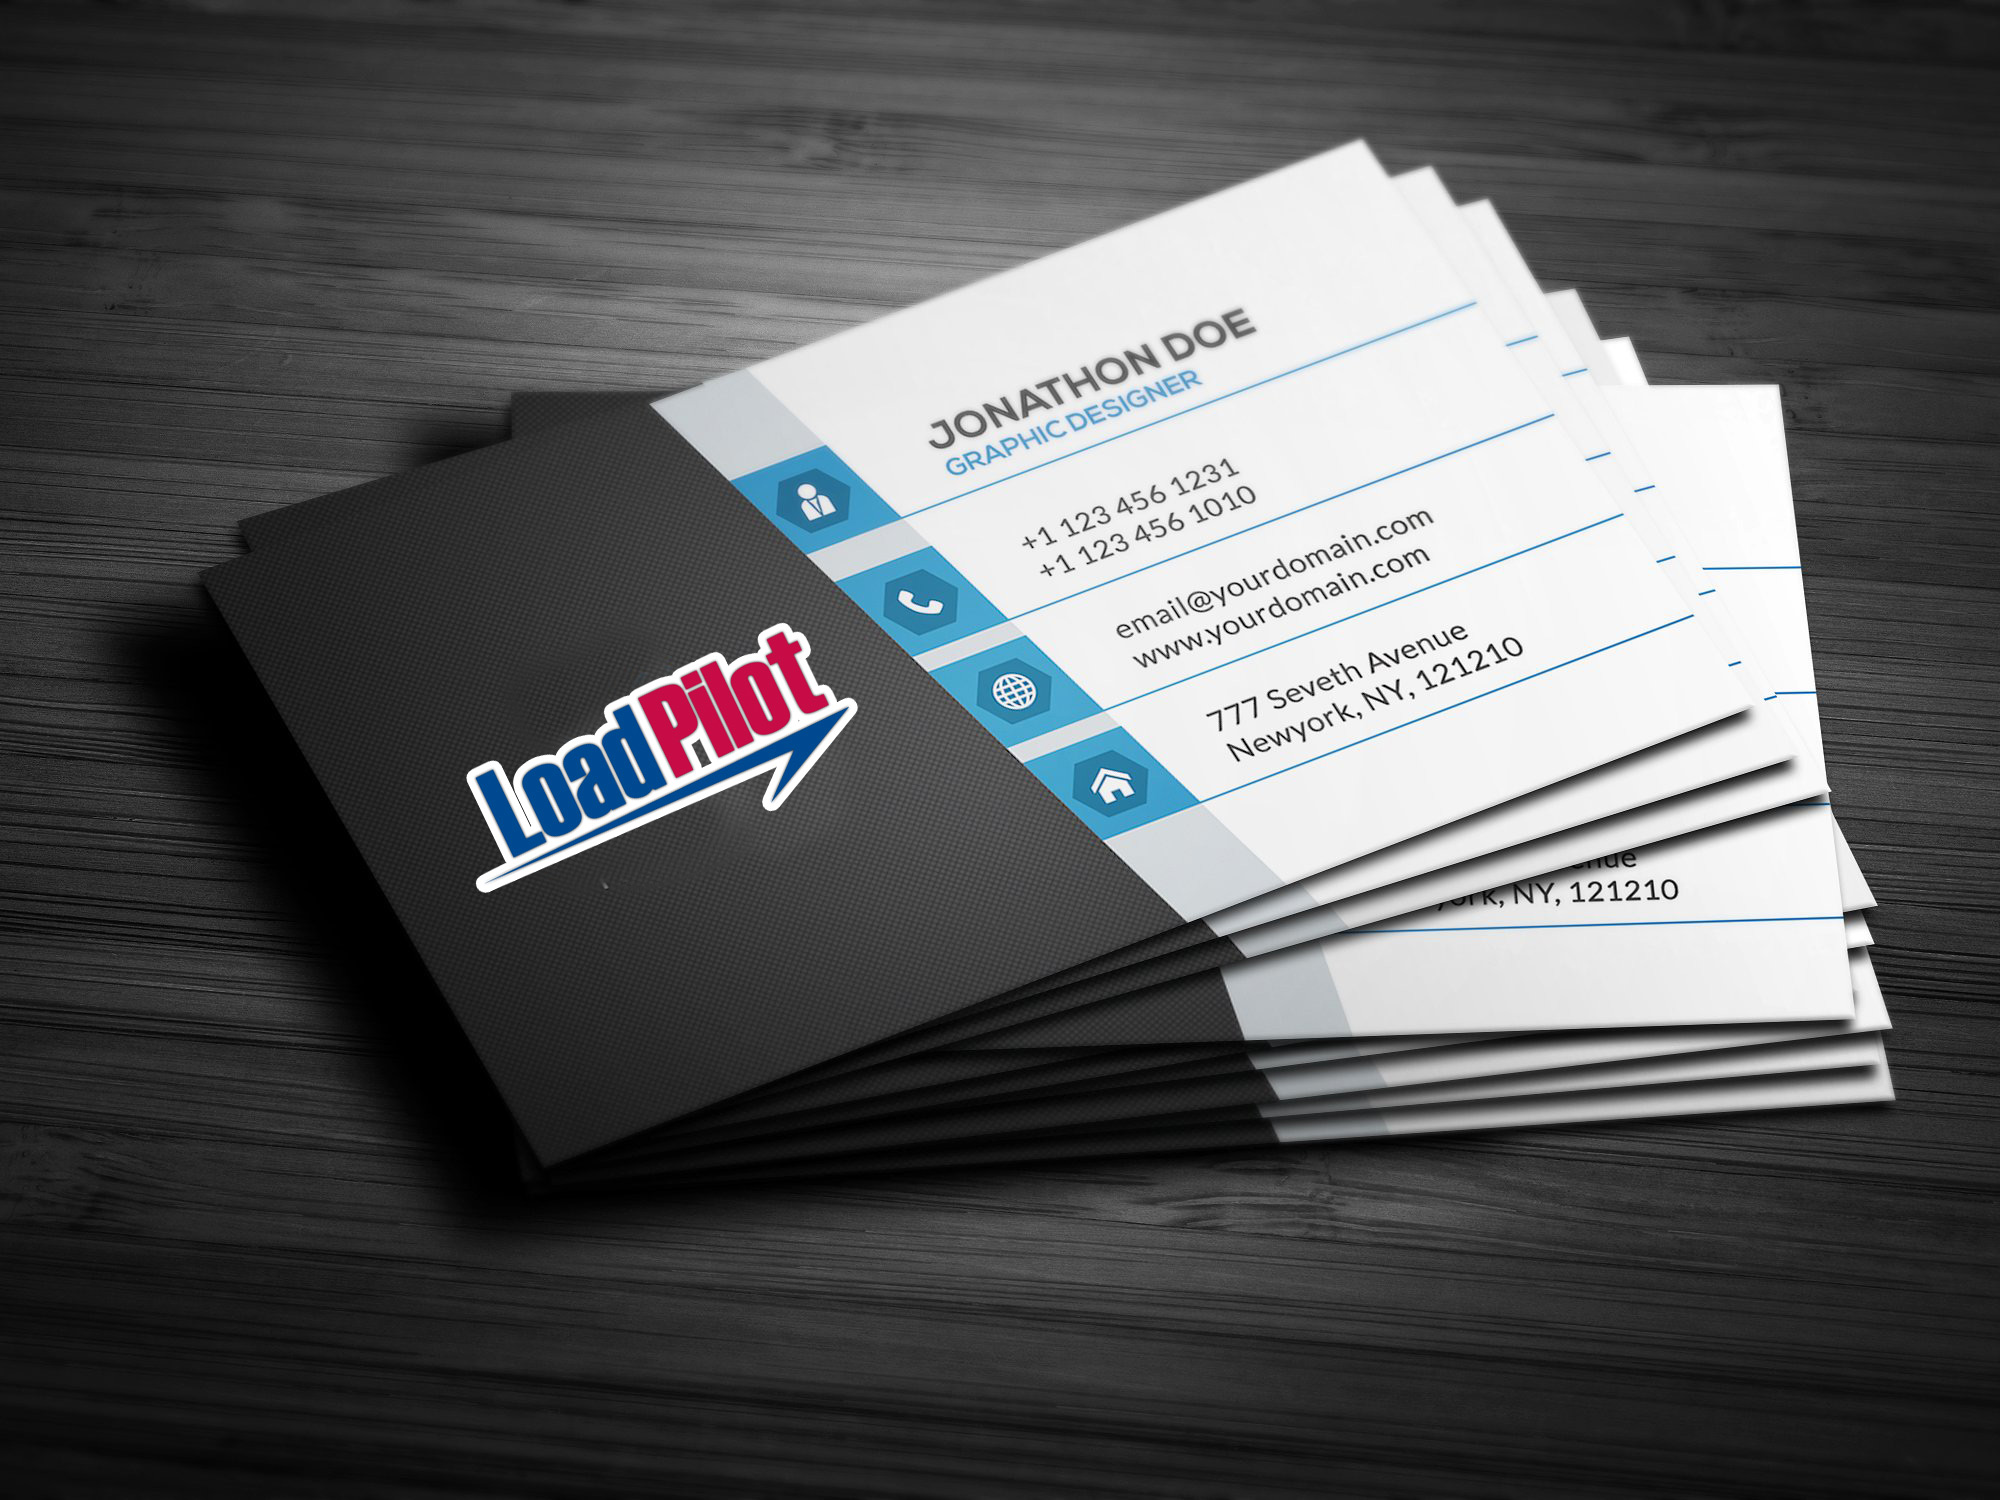 pictures of business cards 2